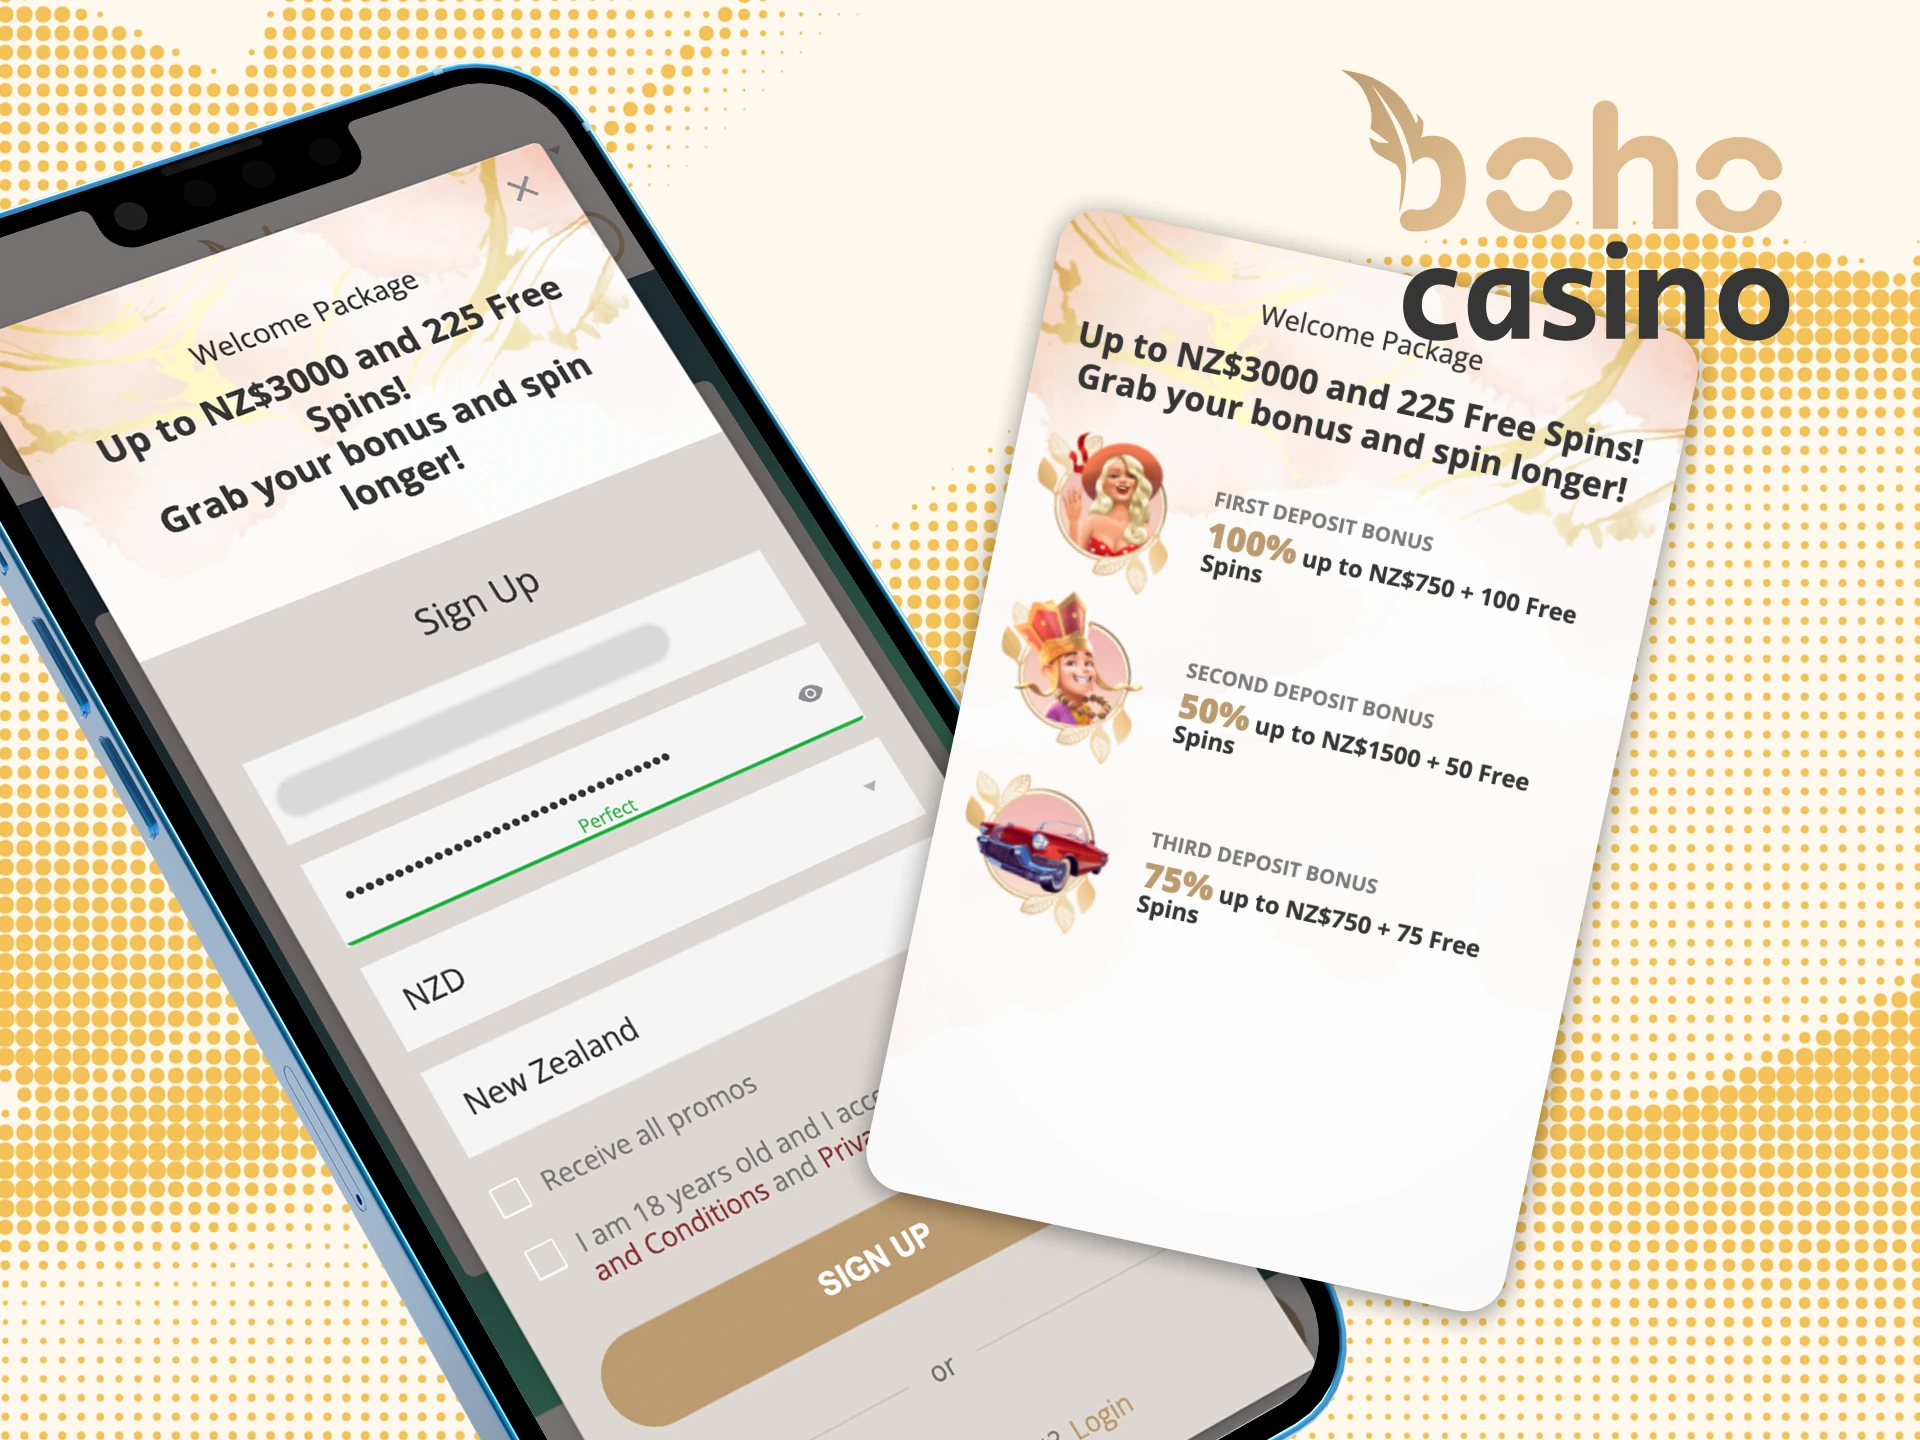 Instructions on how to create an account on the Boho online casino website on your phone.